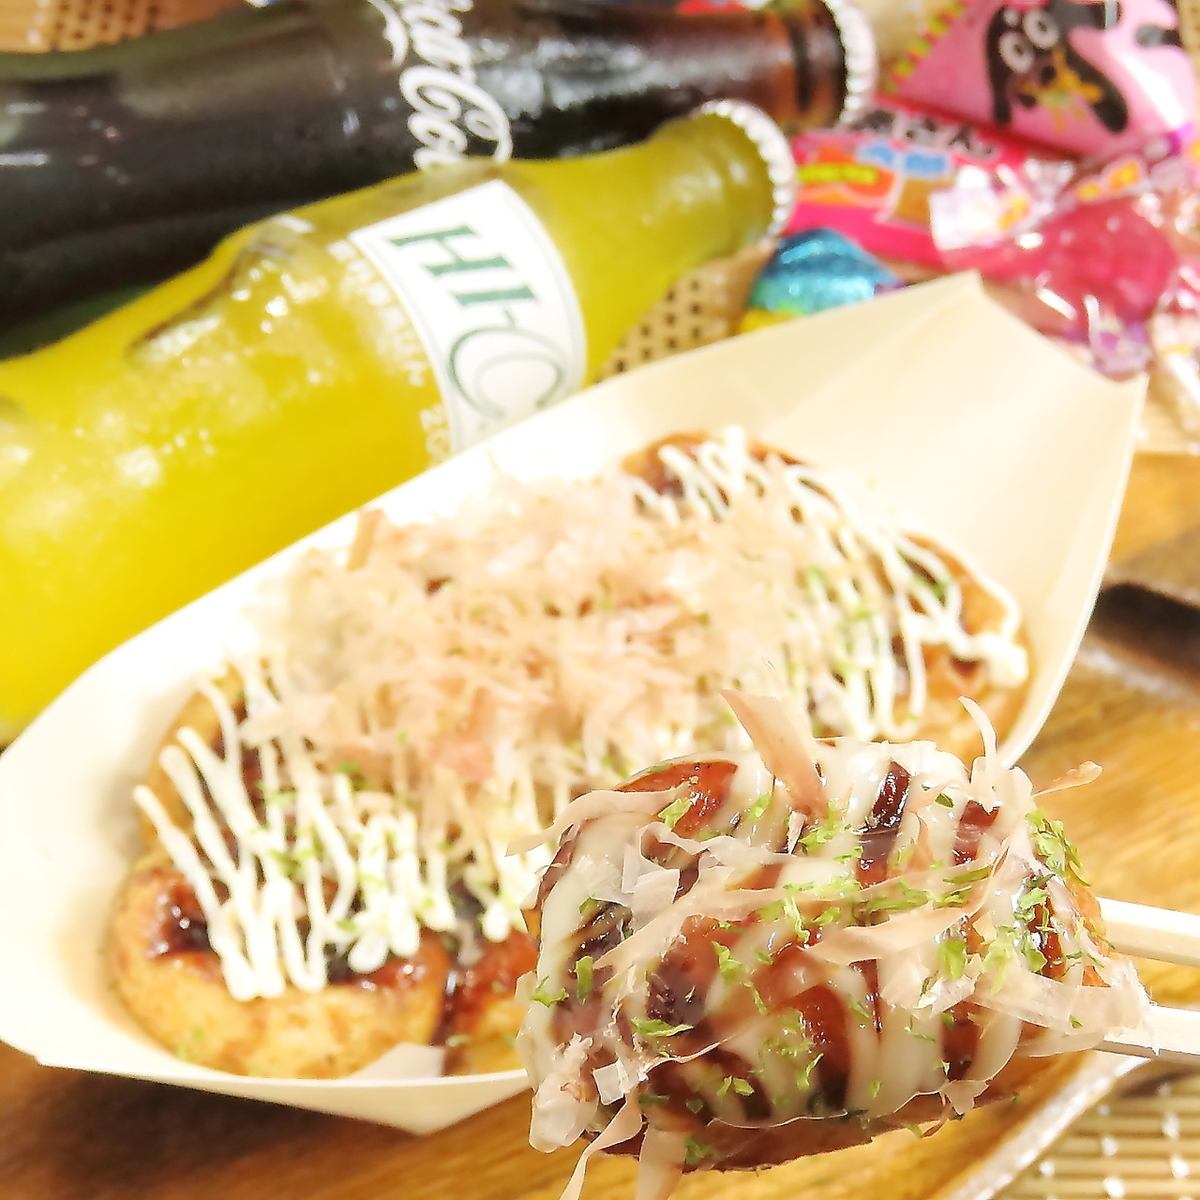 ≪In front of Donki≫ How about a one-coin troffwa takoyaki on the way home from school or shopping?